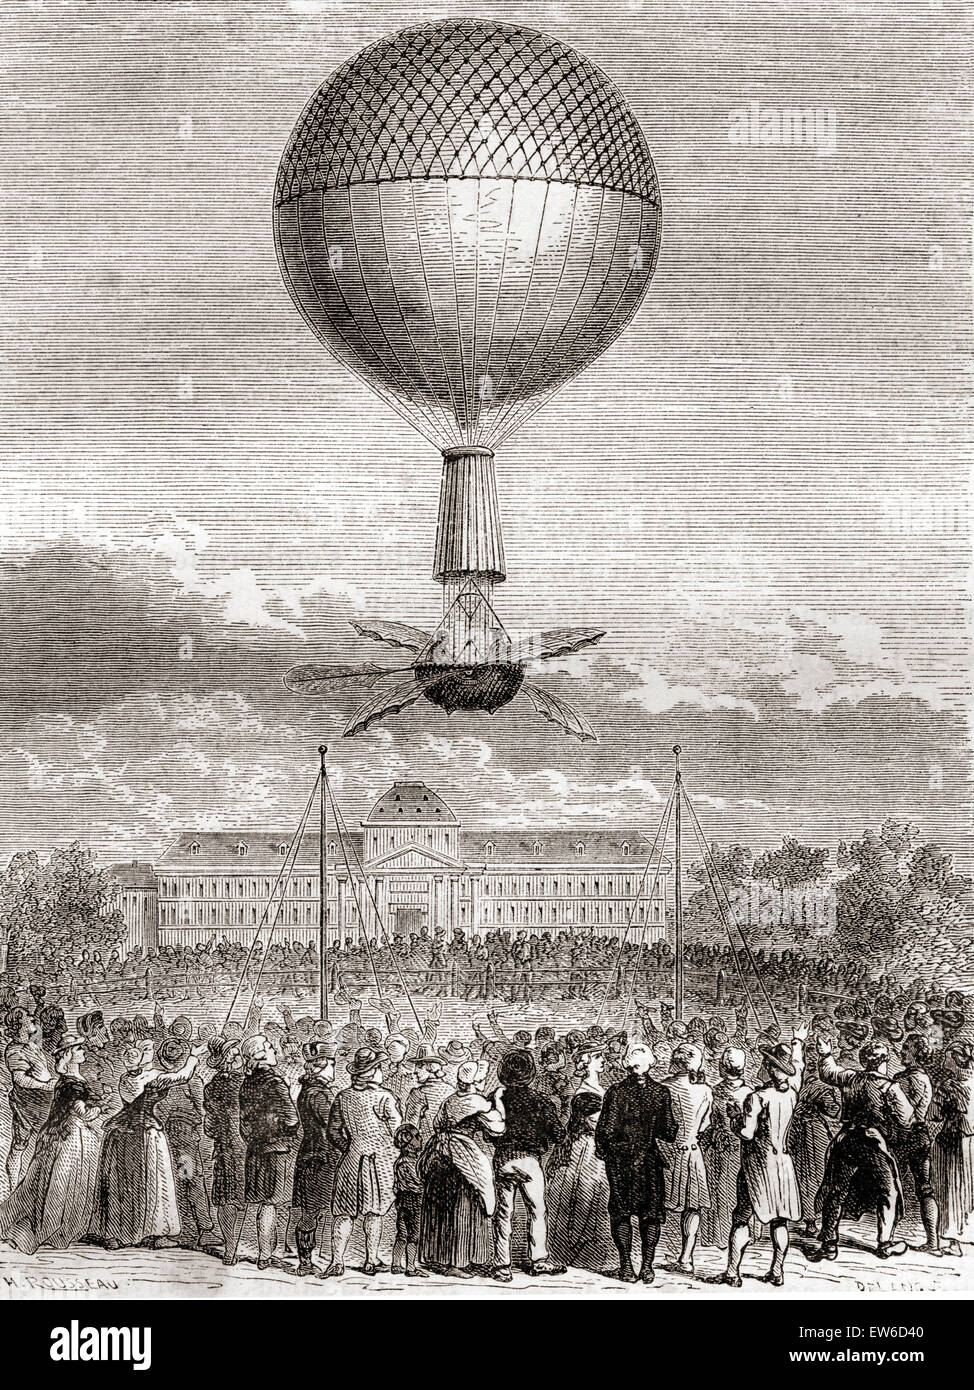 The first successful balloon flight of Jean-Pierre François Blanchard ( 1753 – 1809) on 2 March 1784, in a hydrogen gas balloon launched from the Champ de Mars, Paris, France. Stock Photo